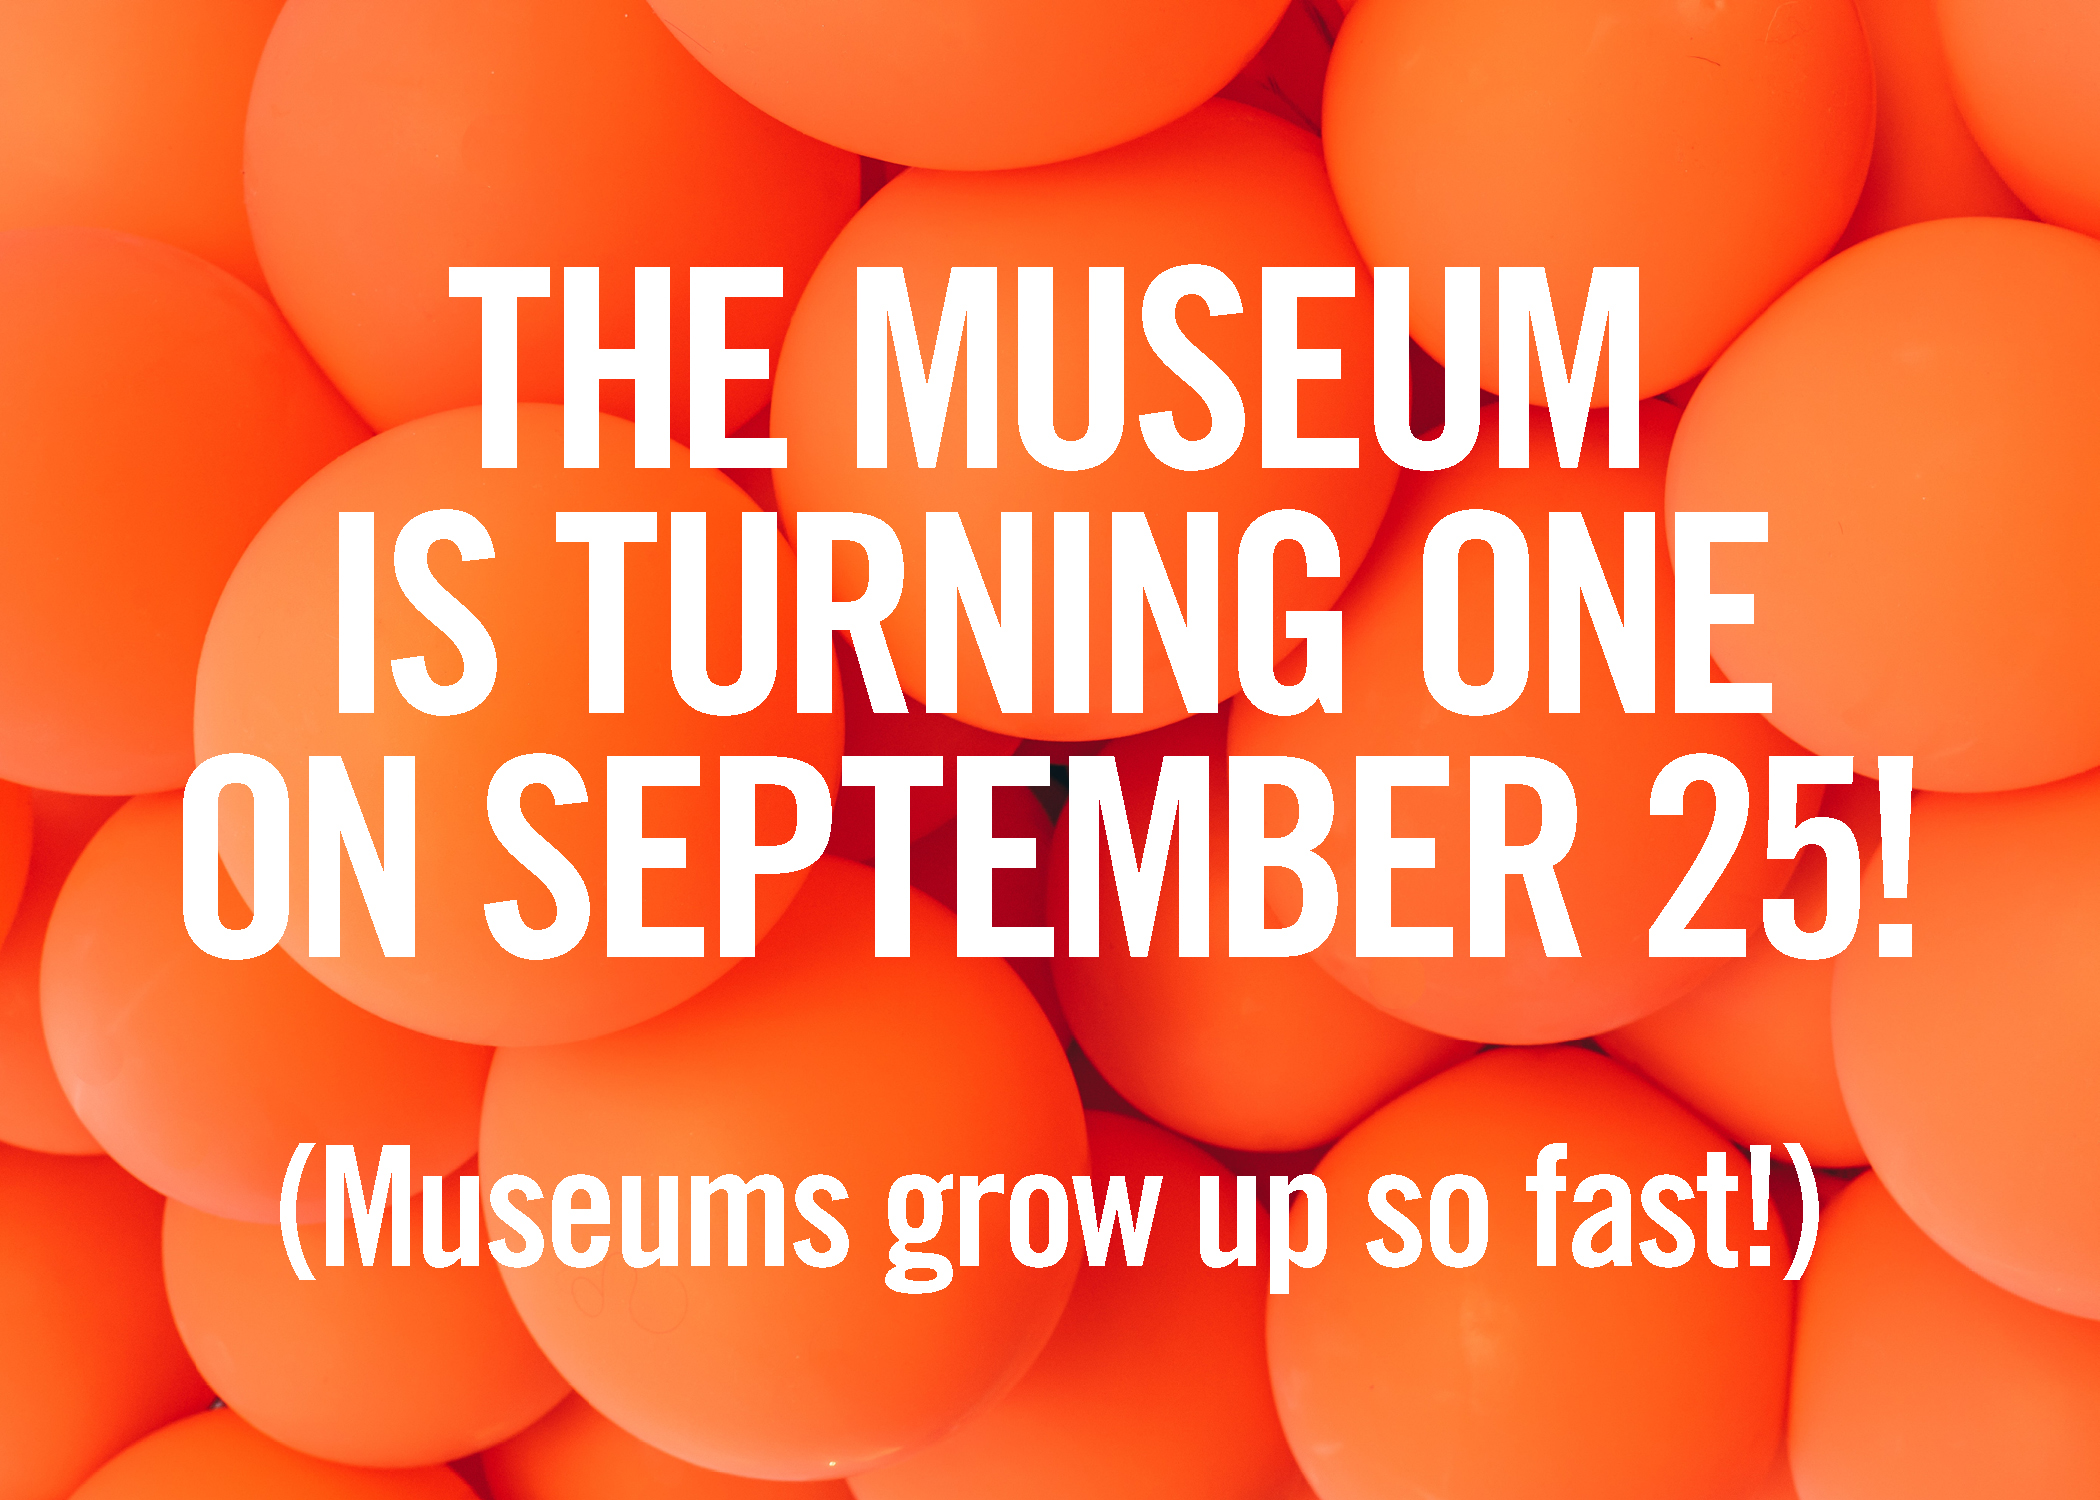 Museum to Celebrate One-Year Anniversary September 25